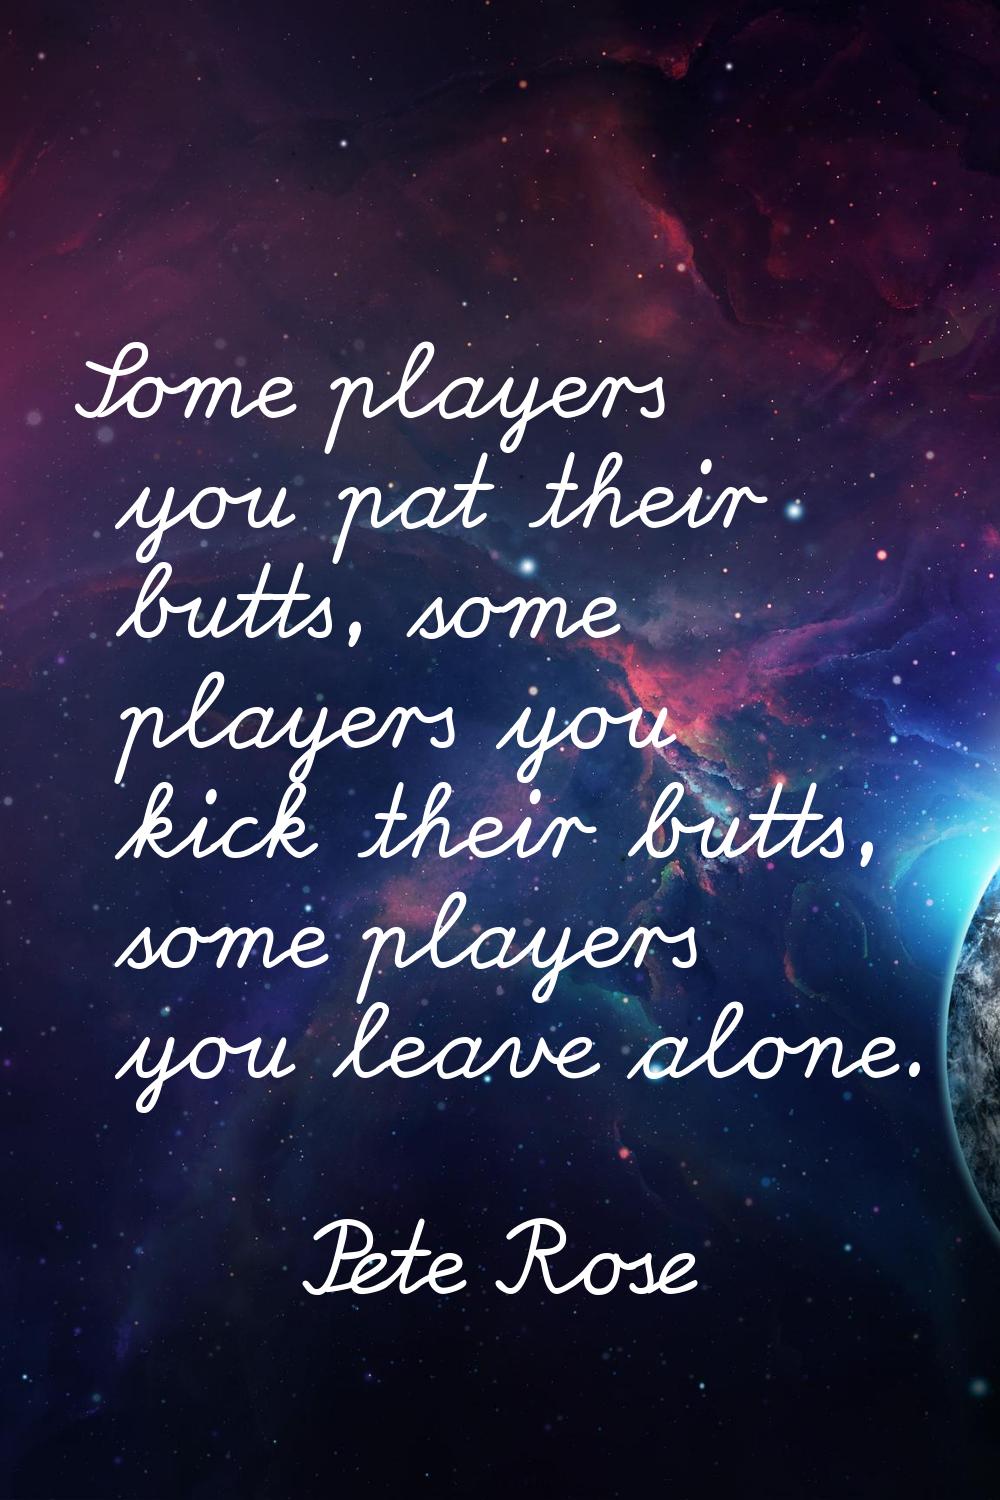 Some players you pat their butts, some players you kick their butts, some players you leave alone.